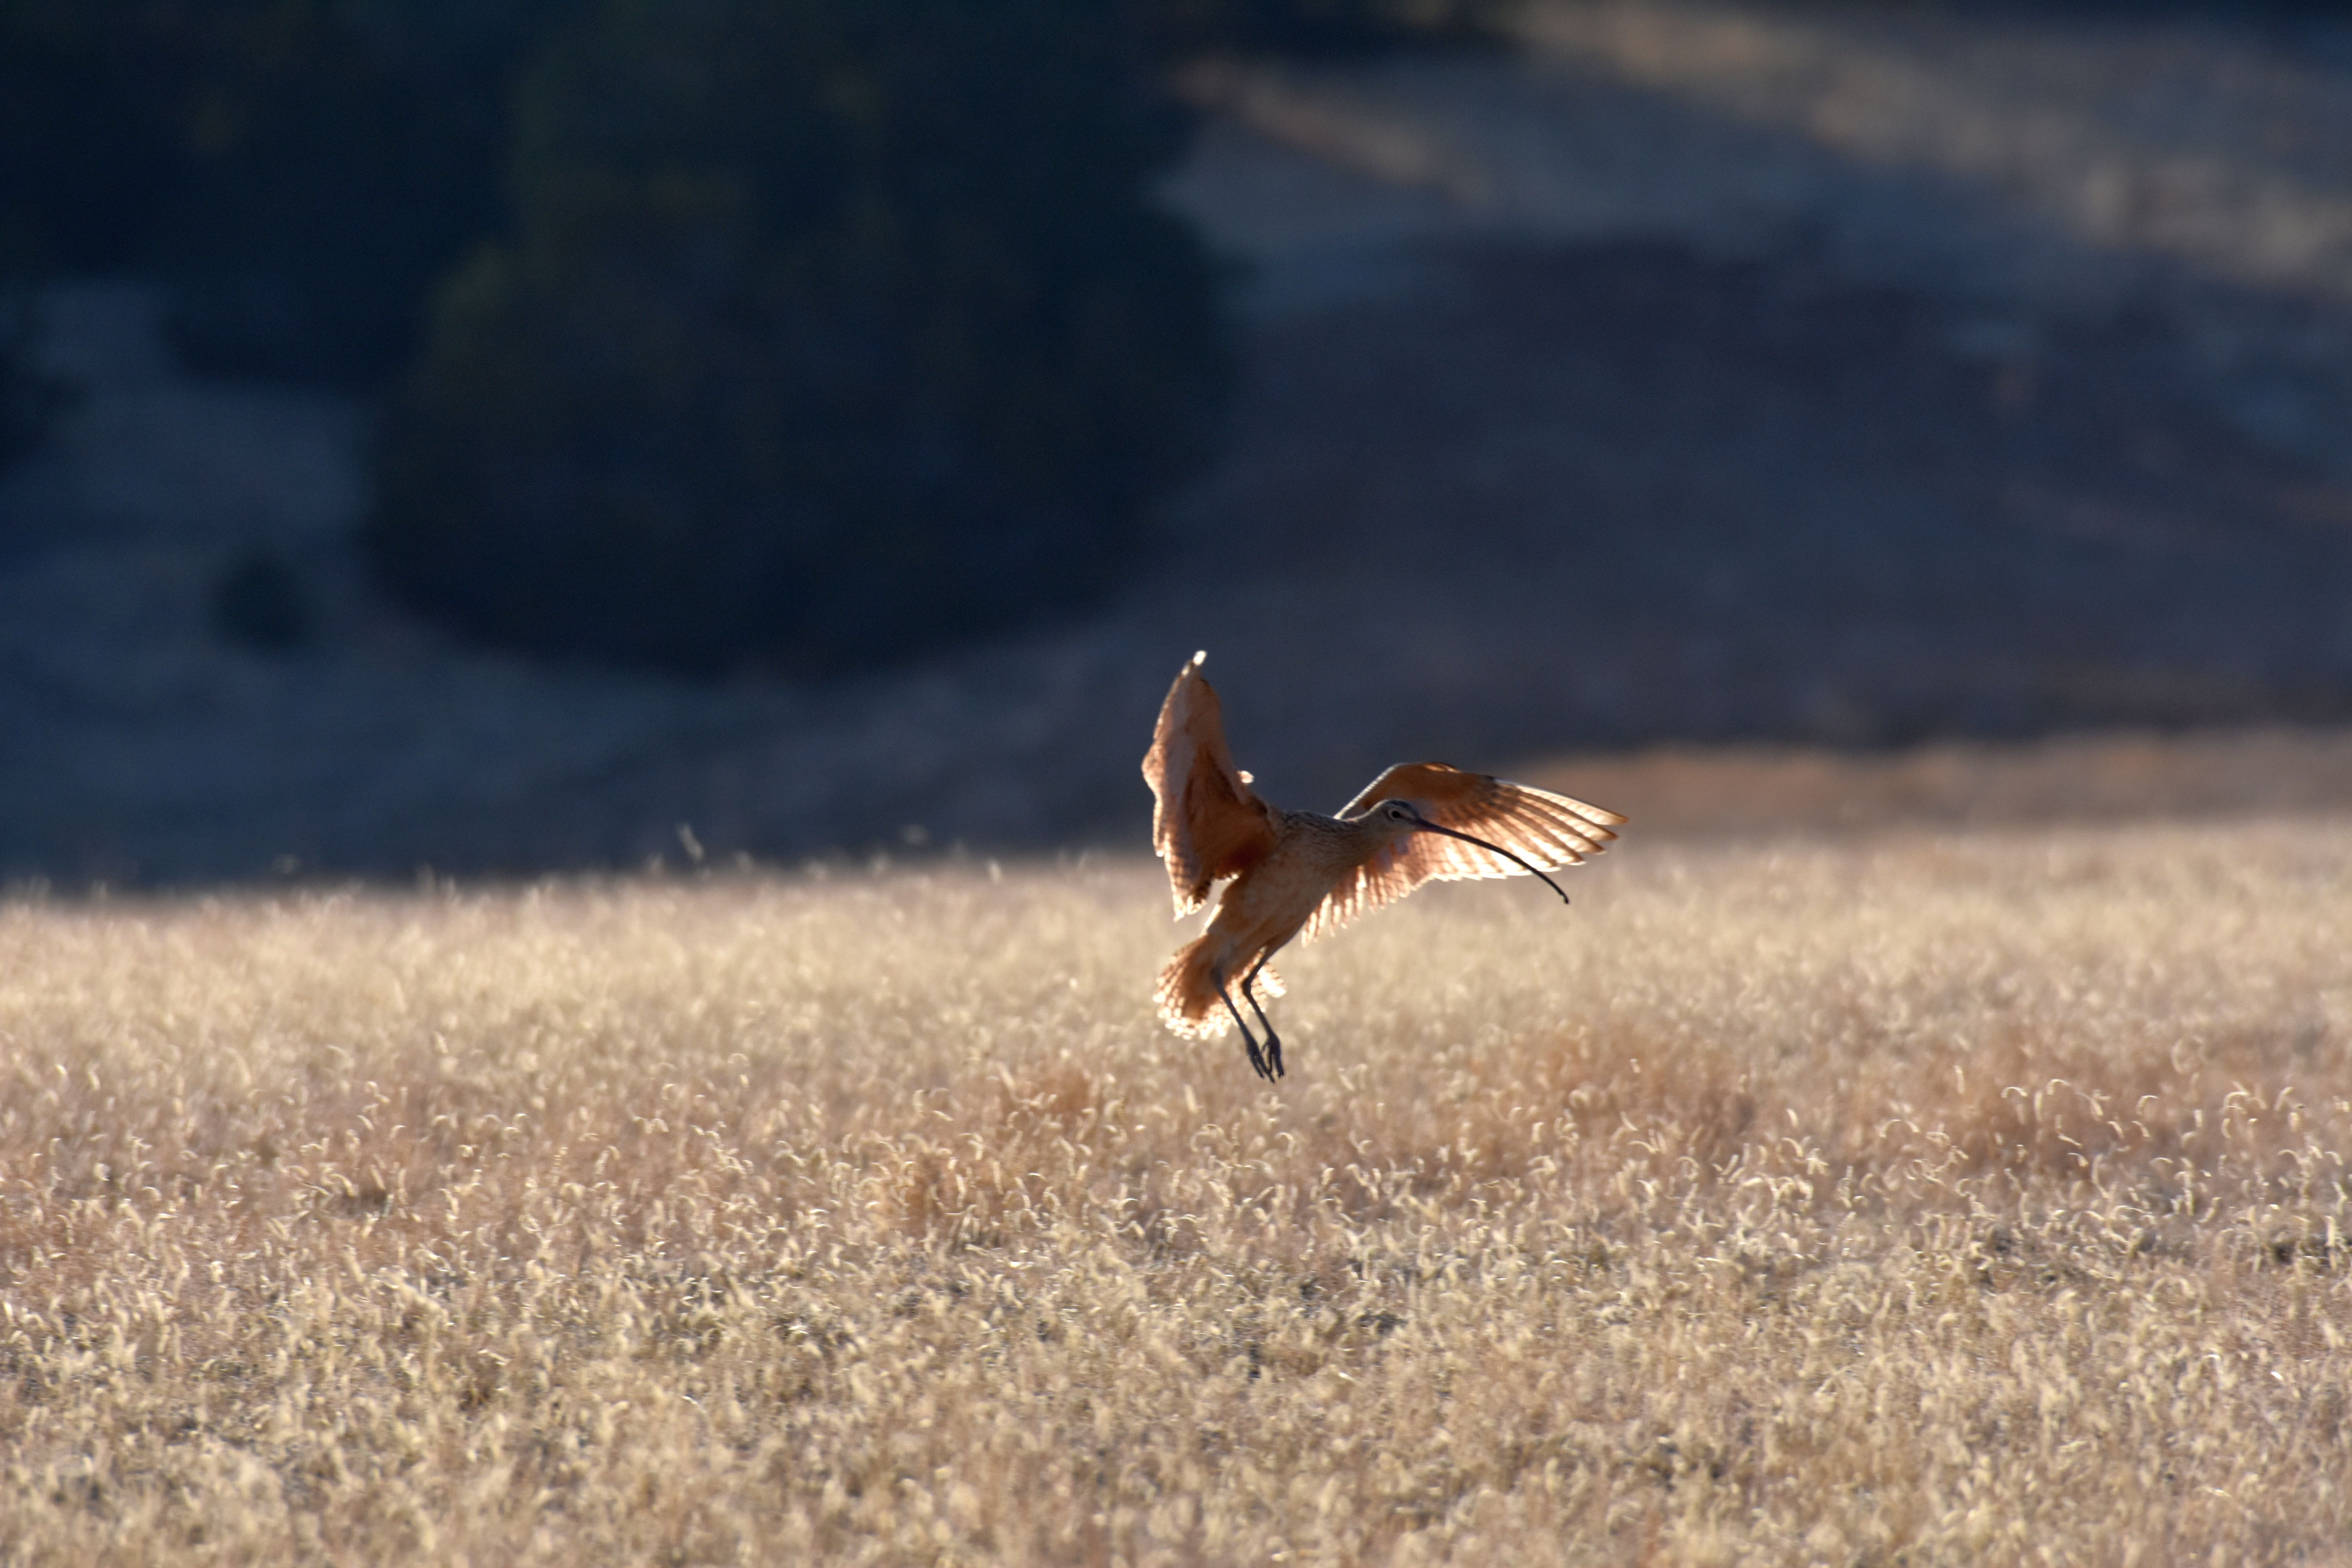 A large, tan-colored bird with a long bill coming in for a landing in a field of brown grass